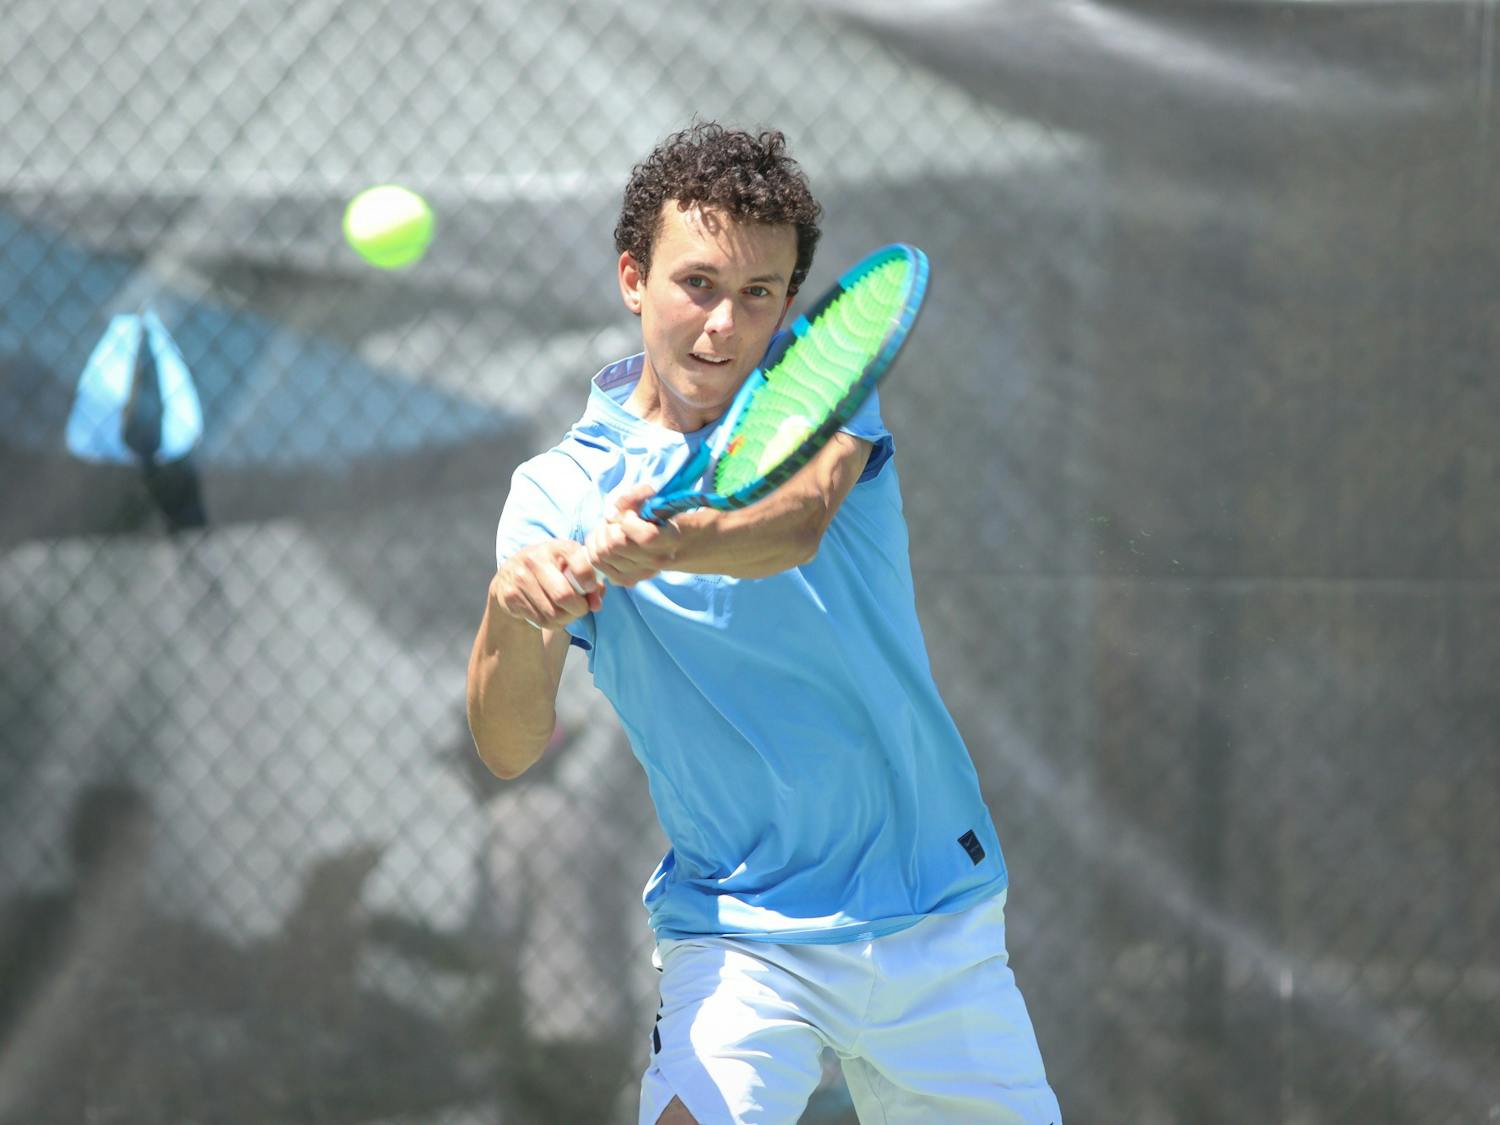 Sophomore Peter Murphy returns a volley with a backhand swing during his singles match against Georgia Tech on Sunday, April 3, 2022. UNC won 7-0.